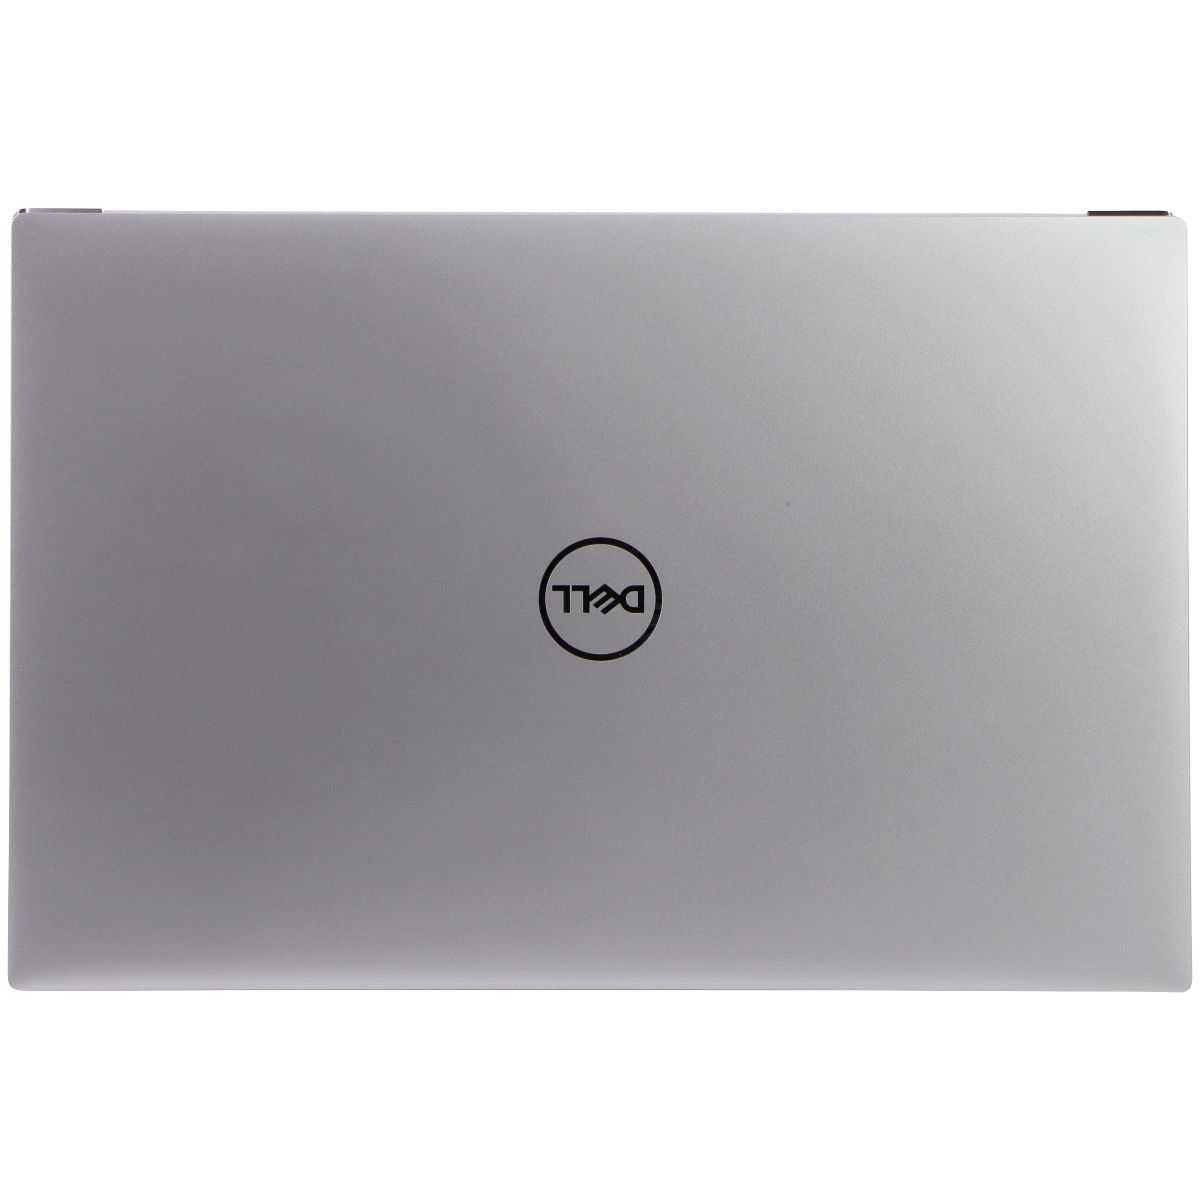 Dell XPS 15 9500 (15.6) UHD+ Touch Laptop i9-10885H/1650 Ti/1 TB SSD/32GB/10 Pro Laptops - PC Laptops & Netbooks Dell    - Simple Cell Bulk Wholesale Pricing - USA Seller